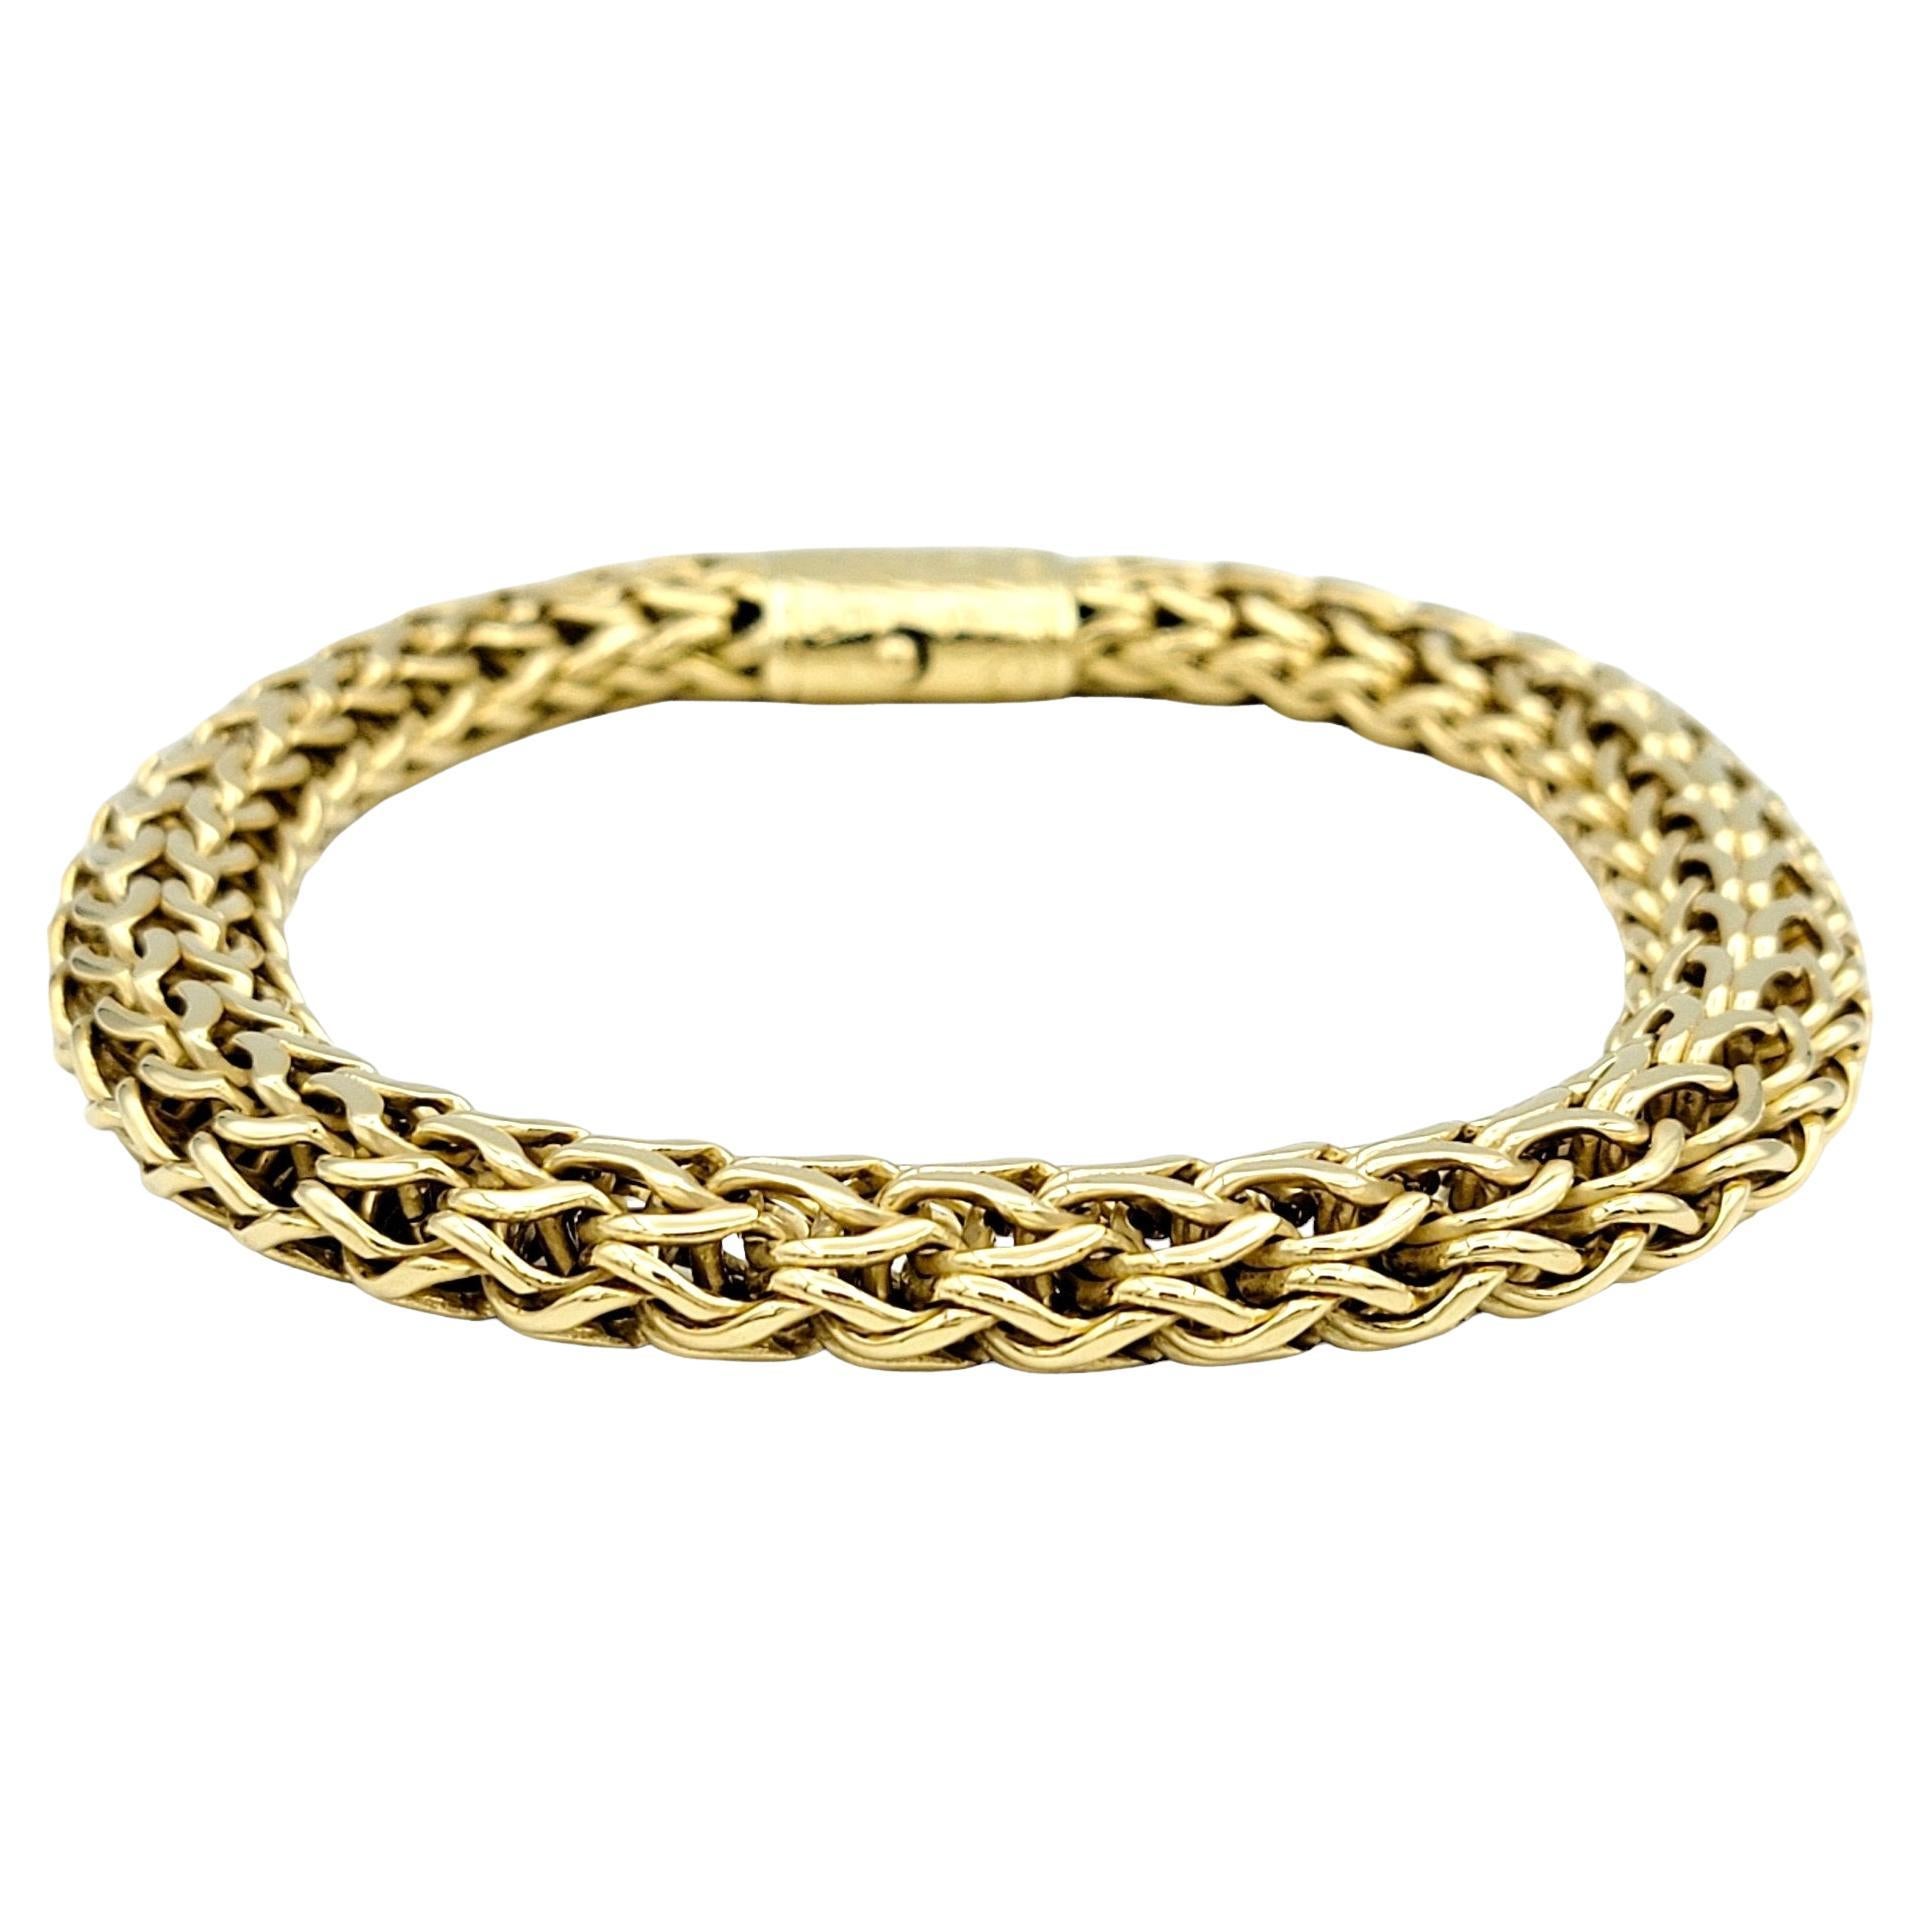 John Hardy Icon Collection 12 mm Woven Link Bracelet in 18 Karat Yellow Gold